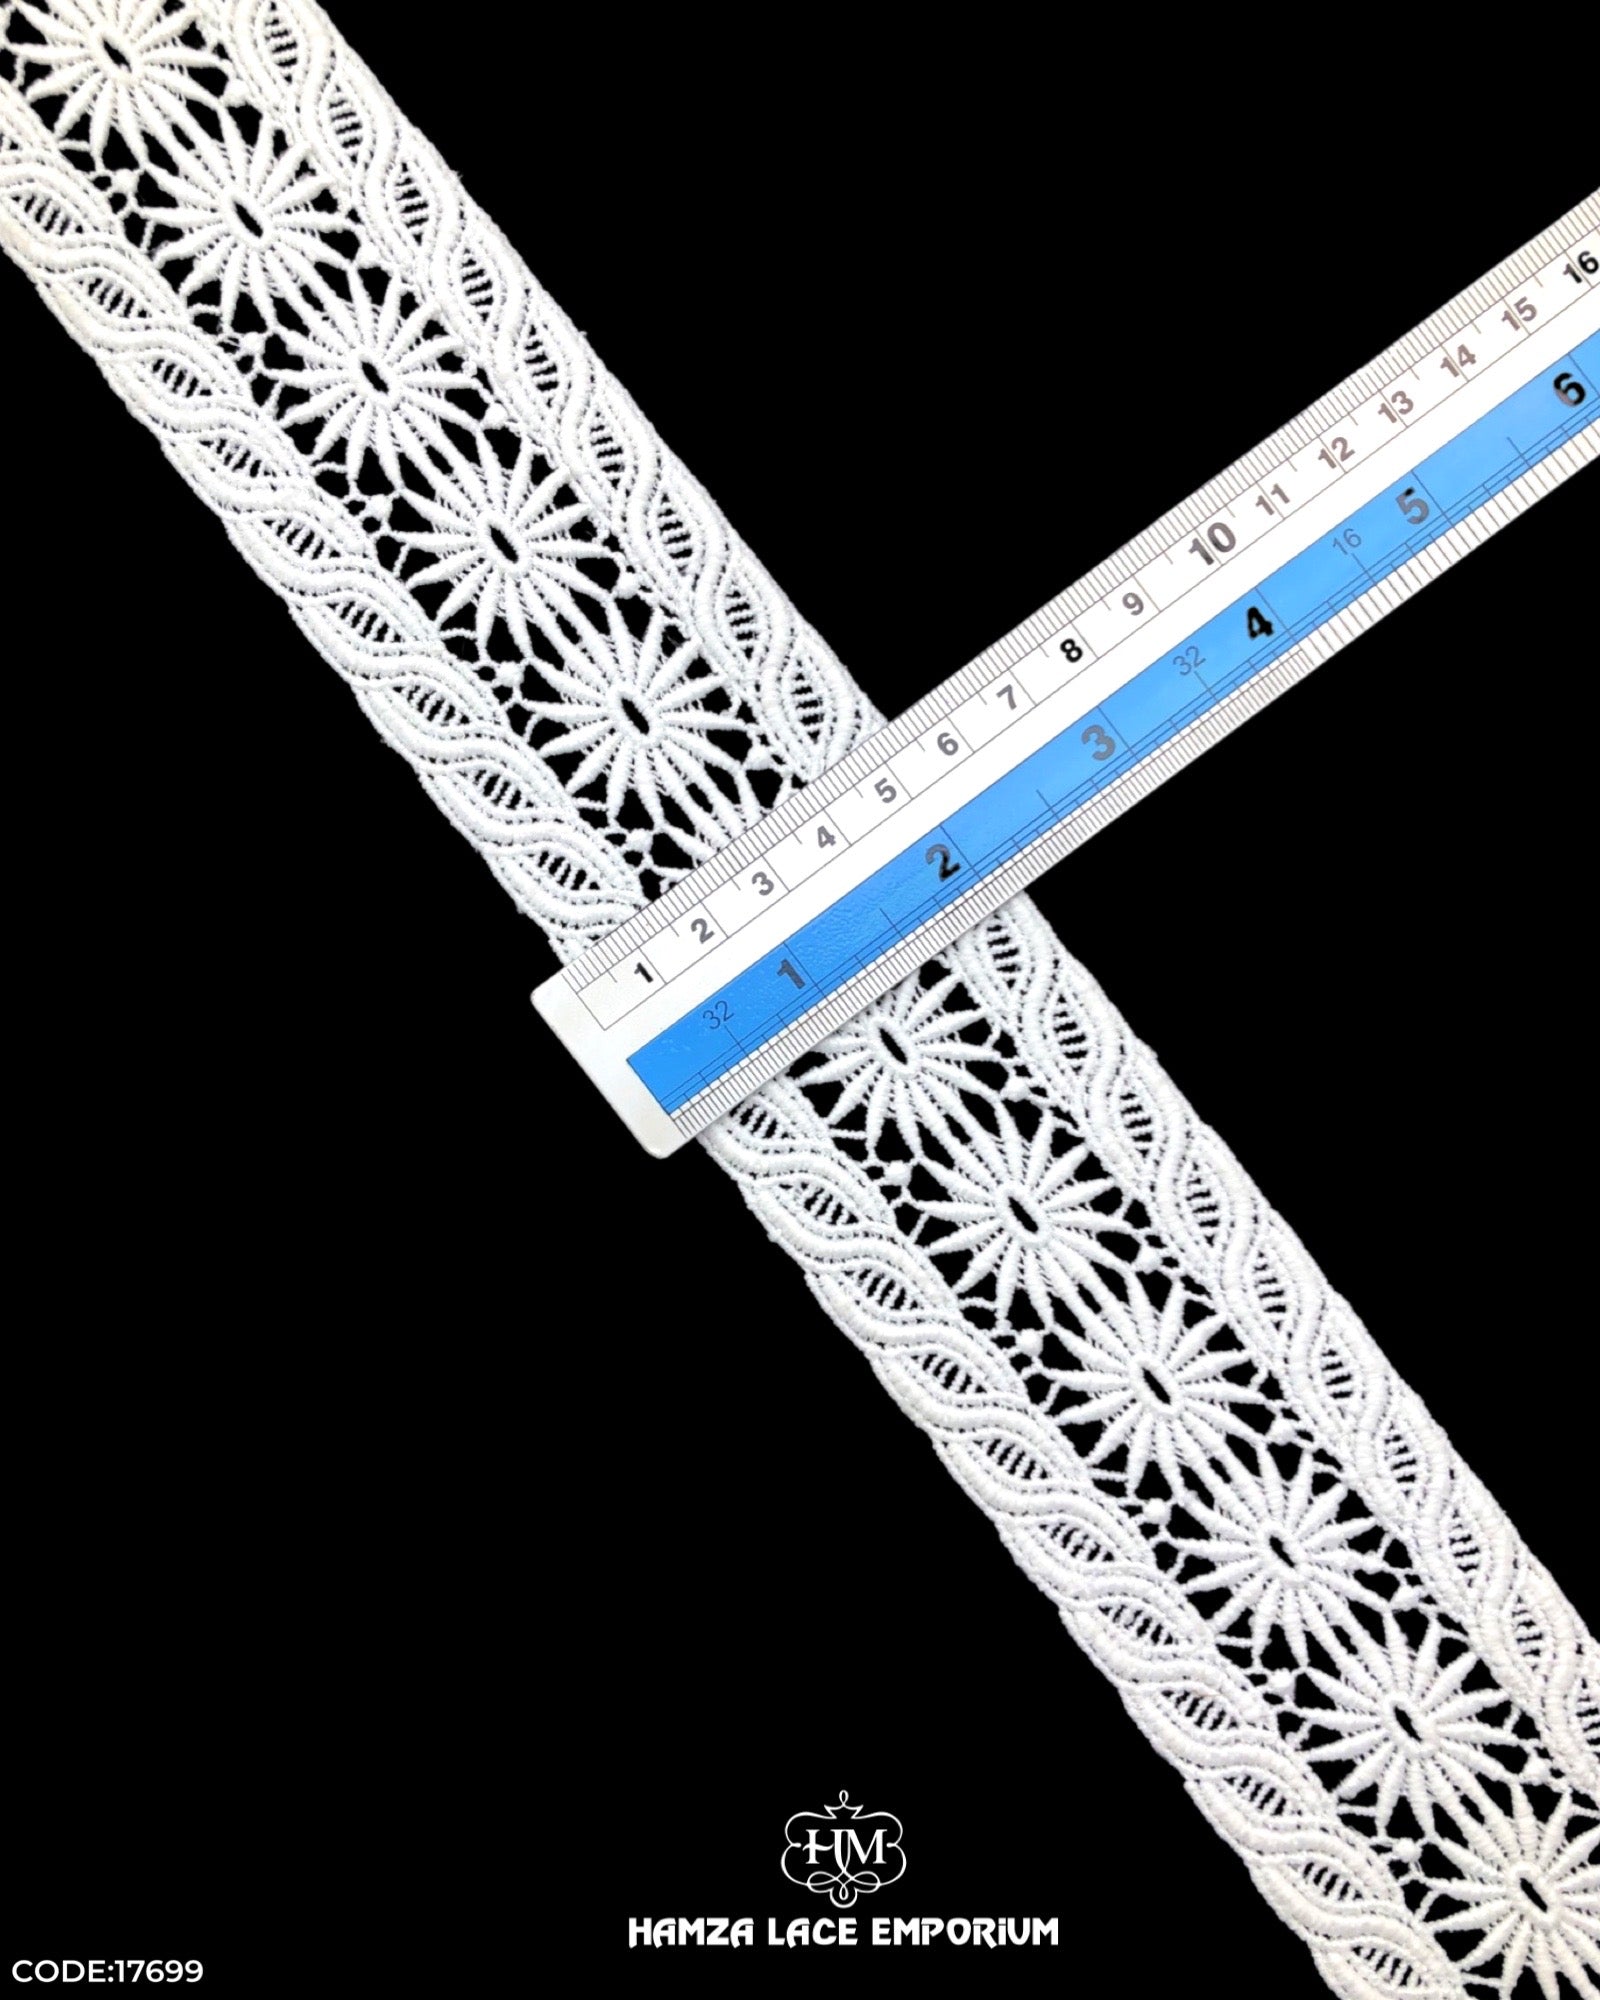 Size of the 'Center Filling Design Lace 17699' is shown as '2.25' inches with the help of a ruler